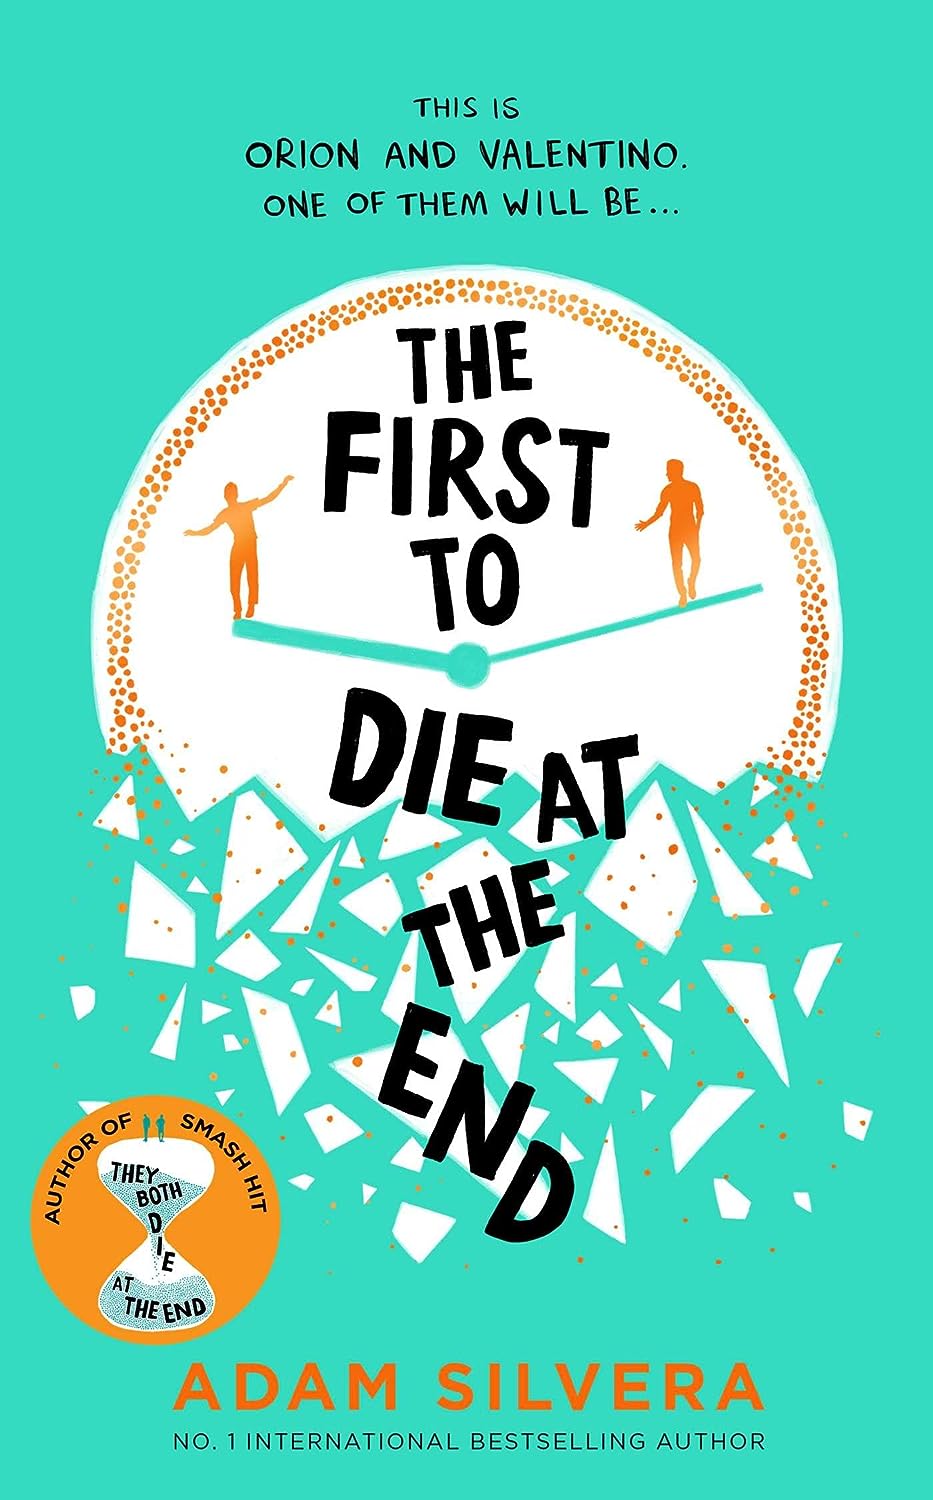 The First to Die at the End: TikTok made me buy it!